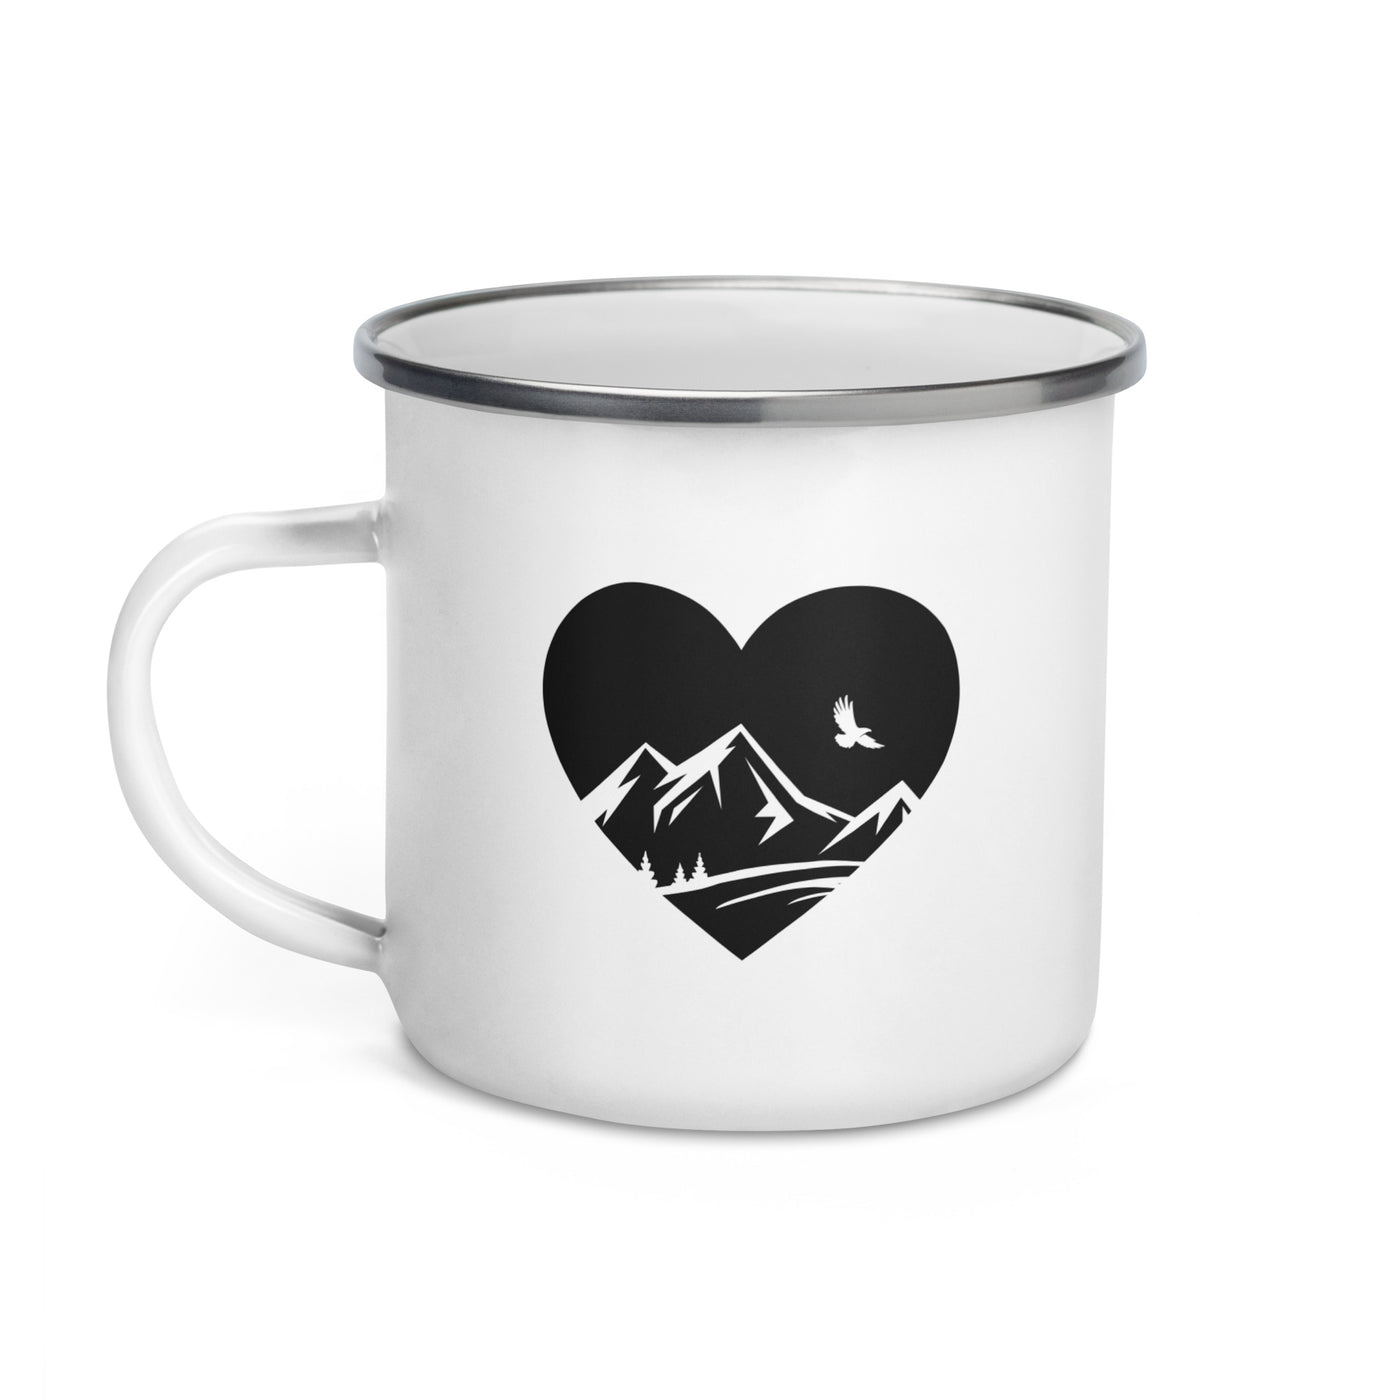 Heart 1 And Mountain - Emaille Tasse berge